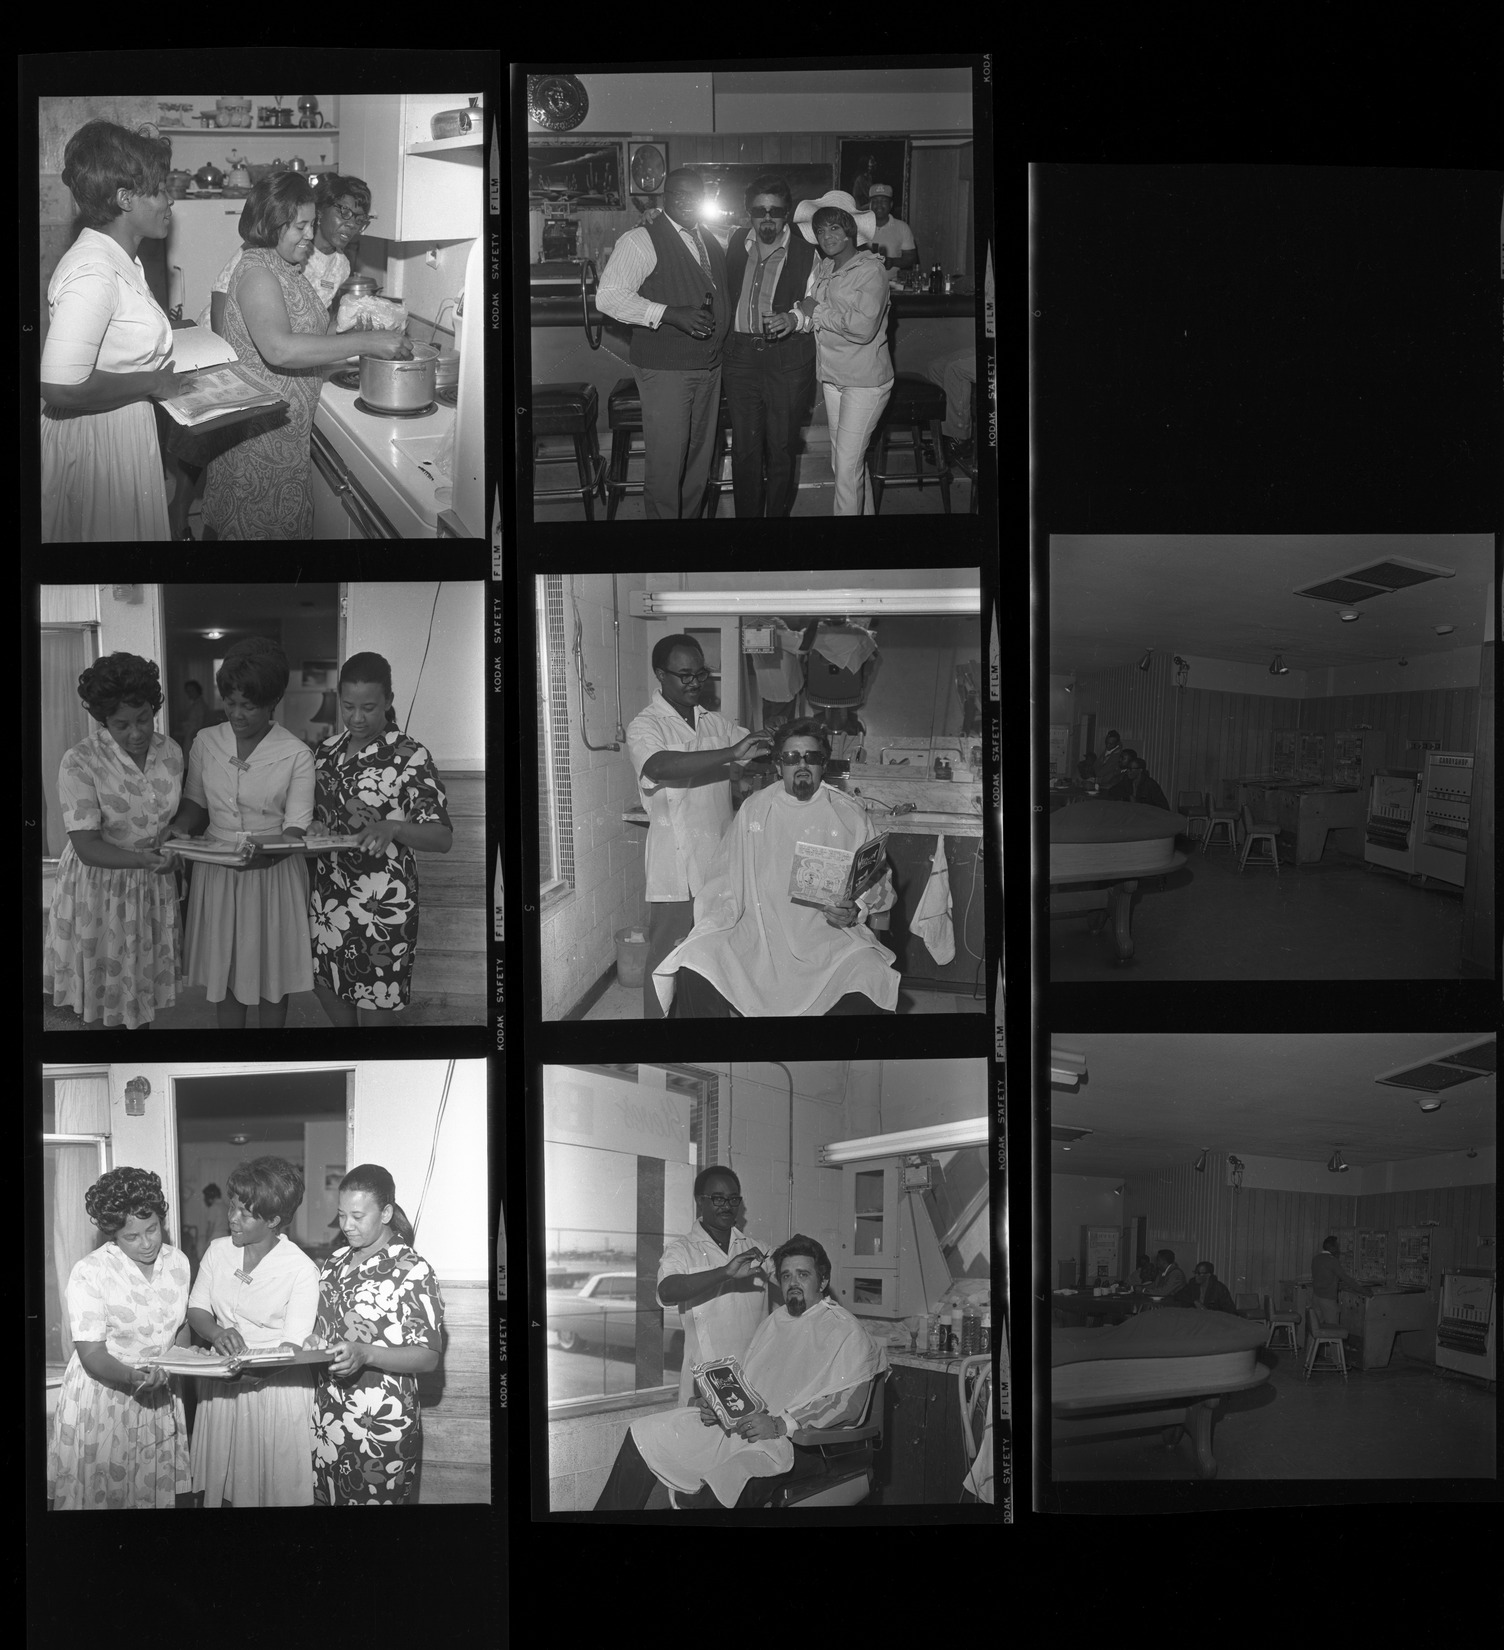 Set of negatives by Clinton Wright including El Rio Club, Wolfman Jack, salesman at Ford, and Home Extension Program, 1970, page 2